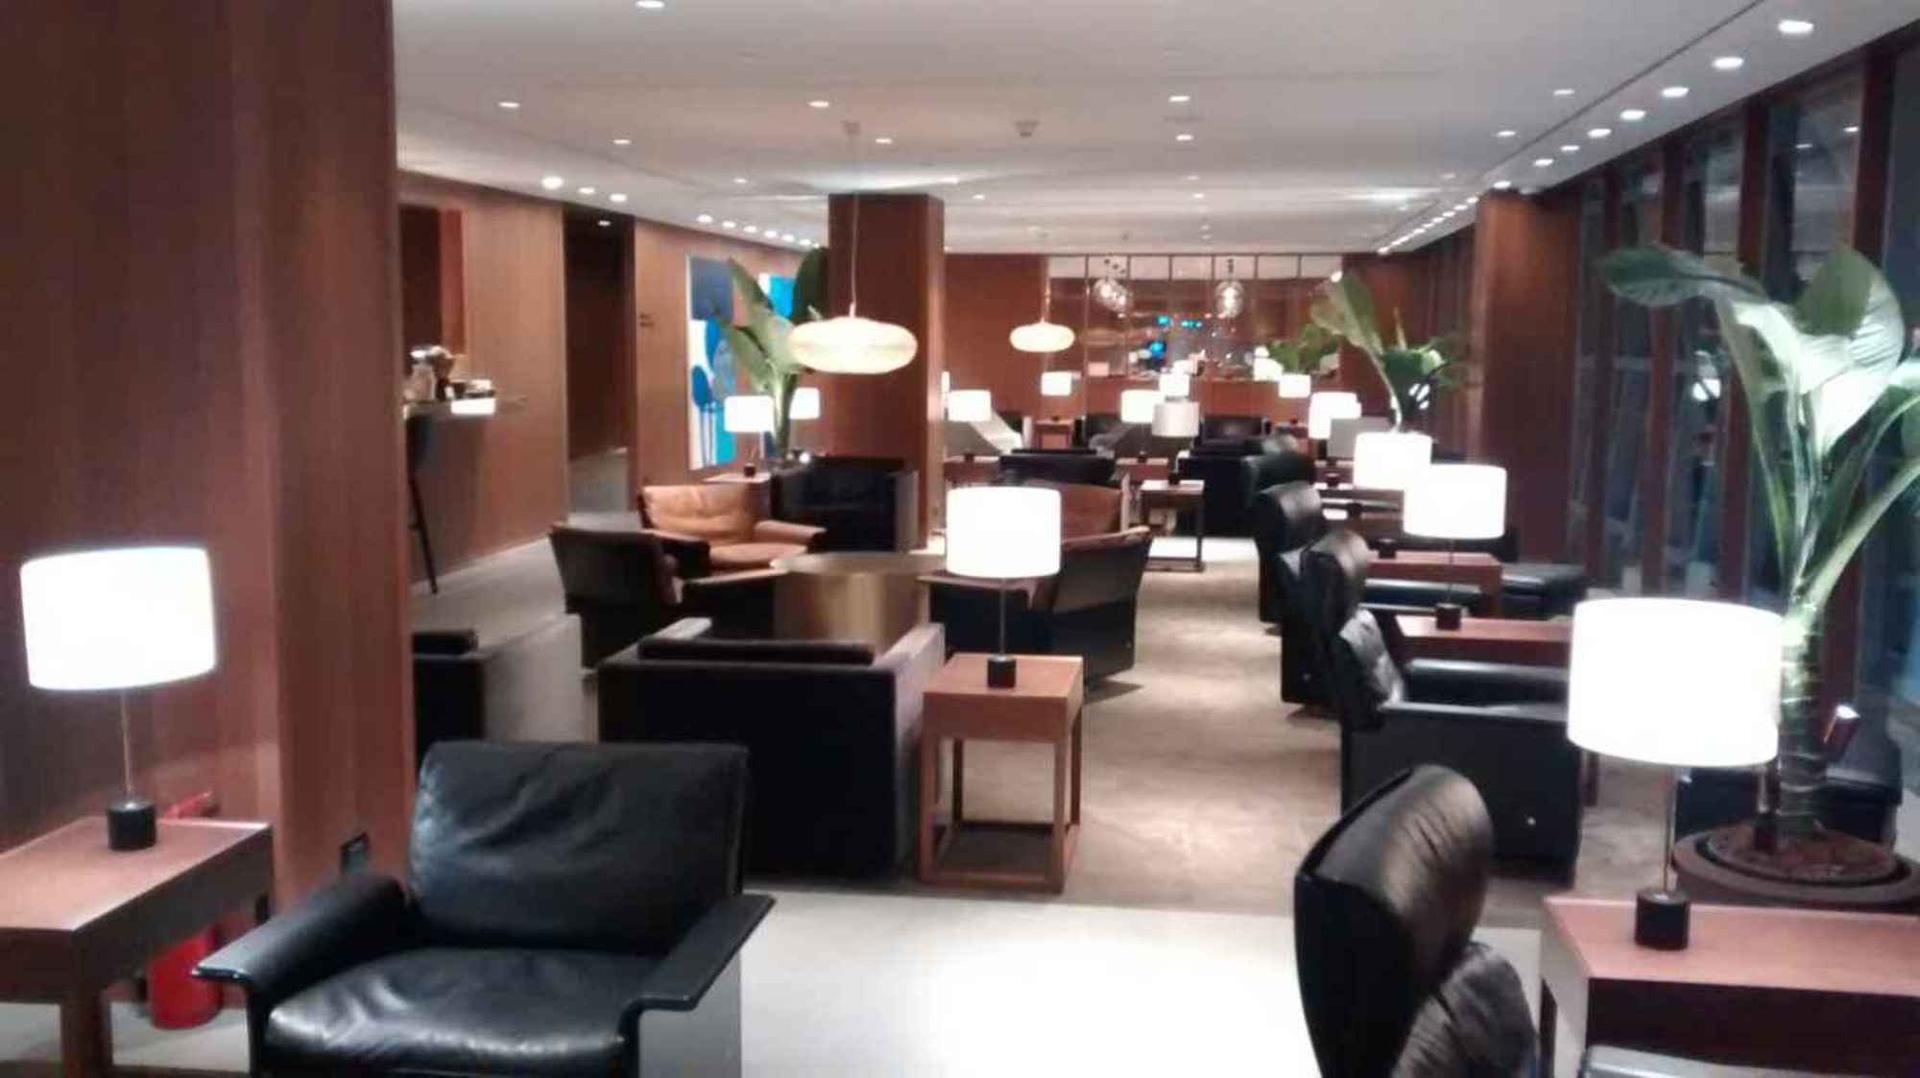 Cathay Pacific First and Business Class Lounge image 19 of 69